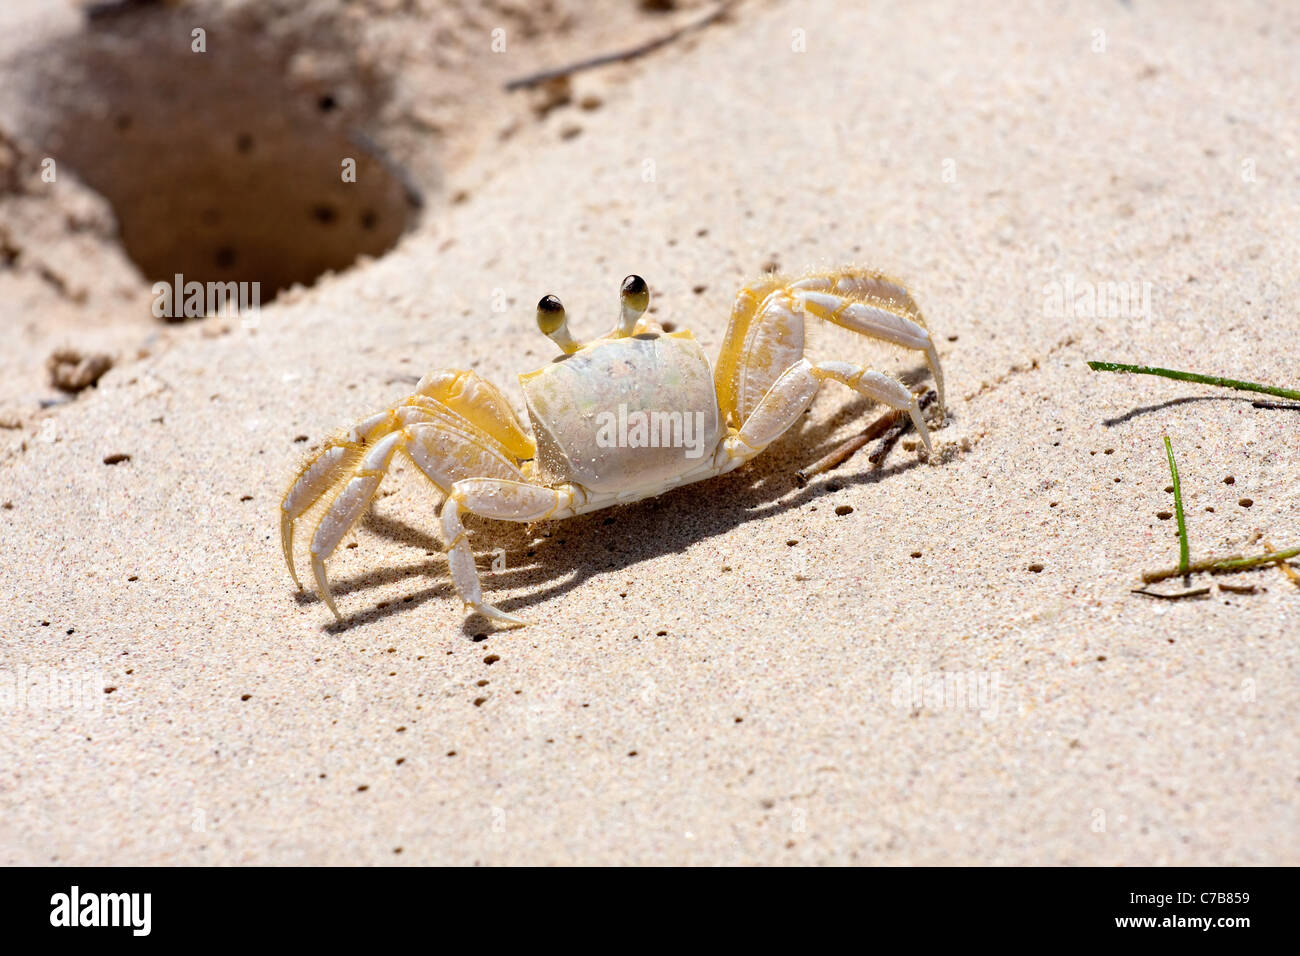 A tropical yellow Caribbean crab standing near the hole in the sand it burrows into. Stock Photo